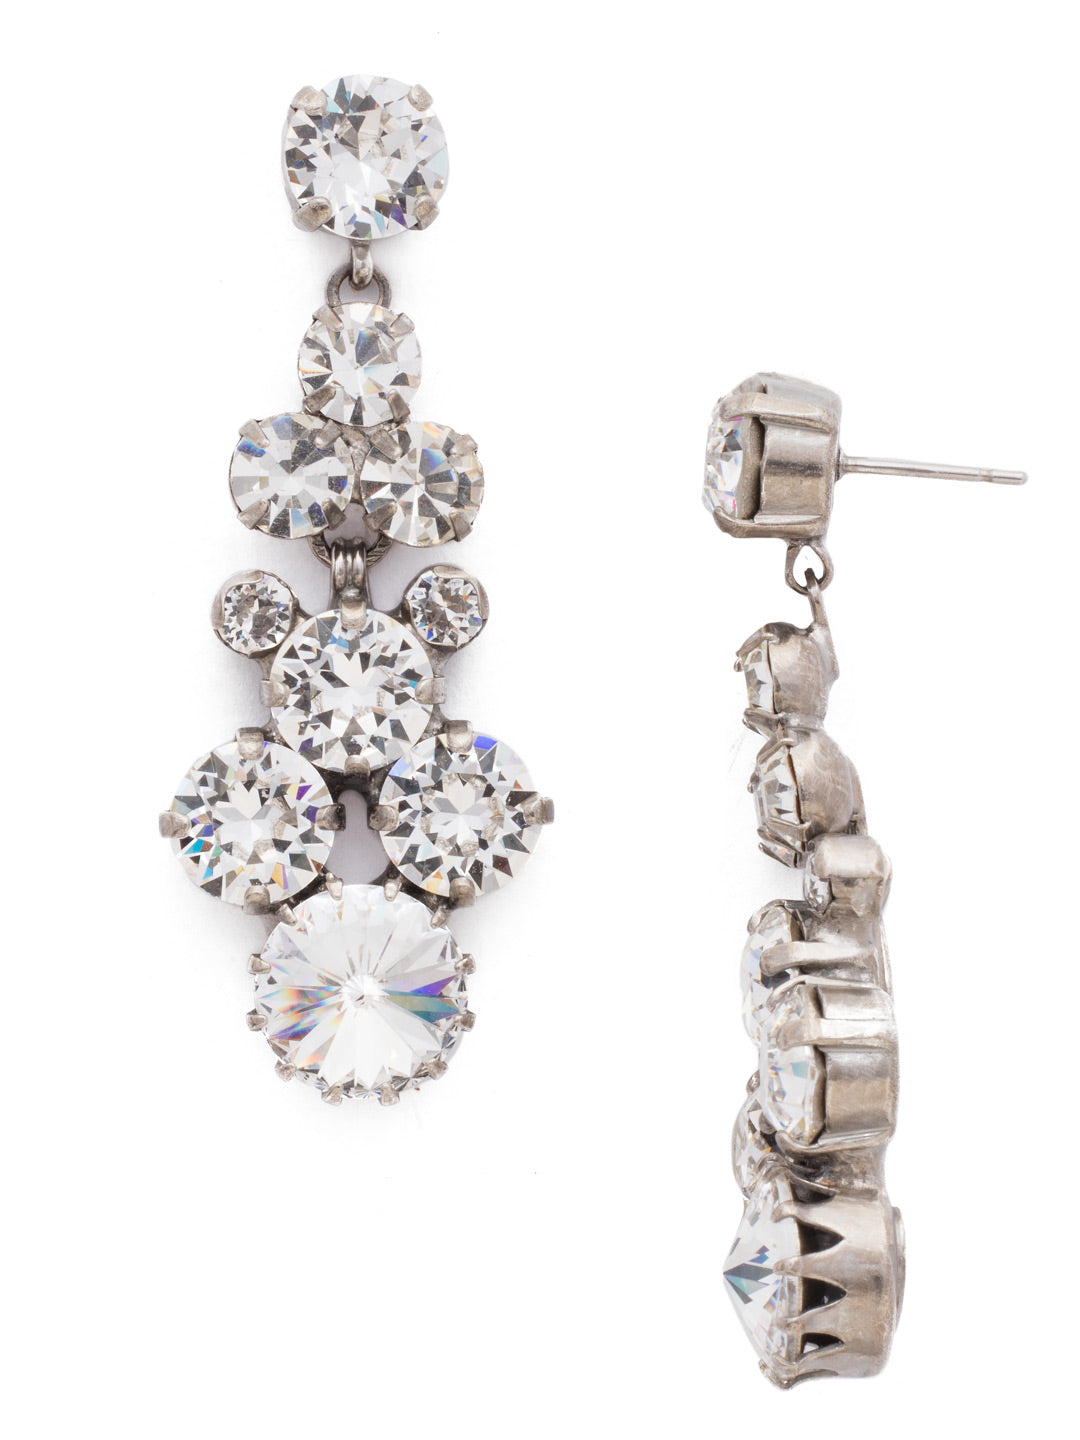 Well-Rounded Crystal Drop Earring - EDH27ASCRY - Our Well-Rounded Crystal Drop Earring features an array of round crystals cascading from a post. Crystal clusters form this exquisite earring for a magnificent statement.